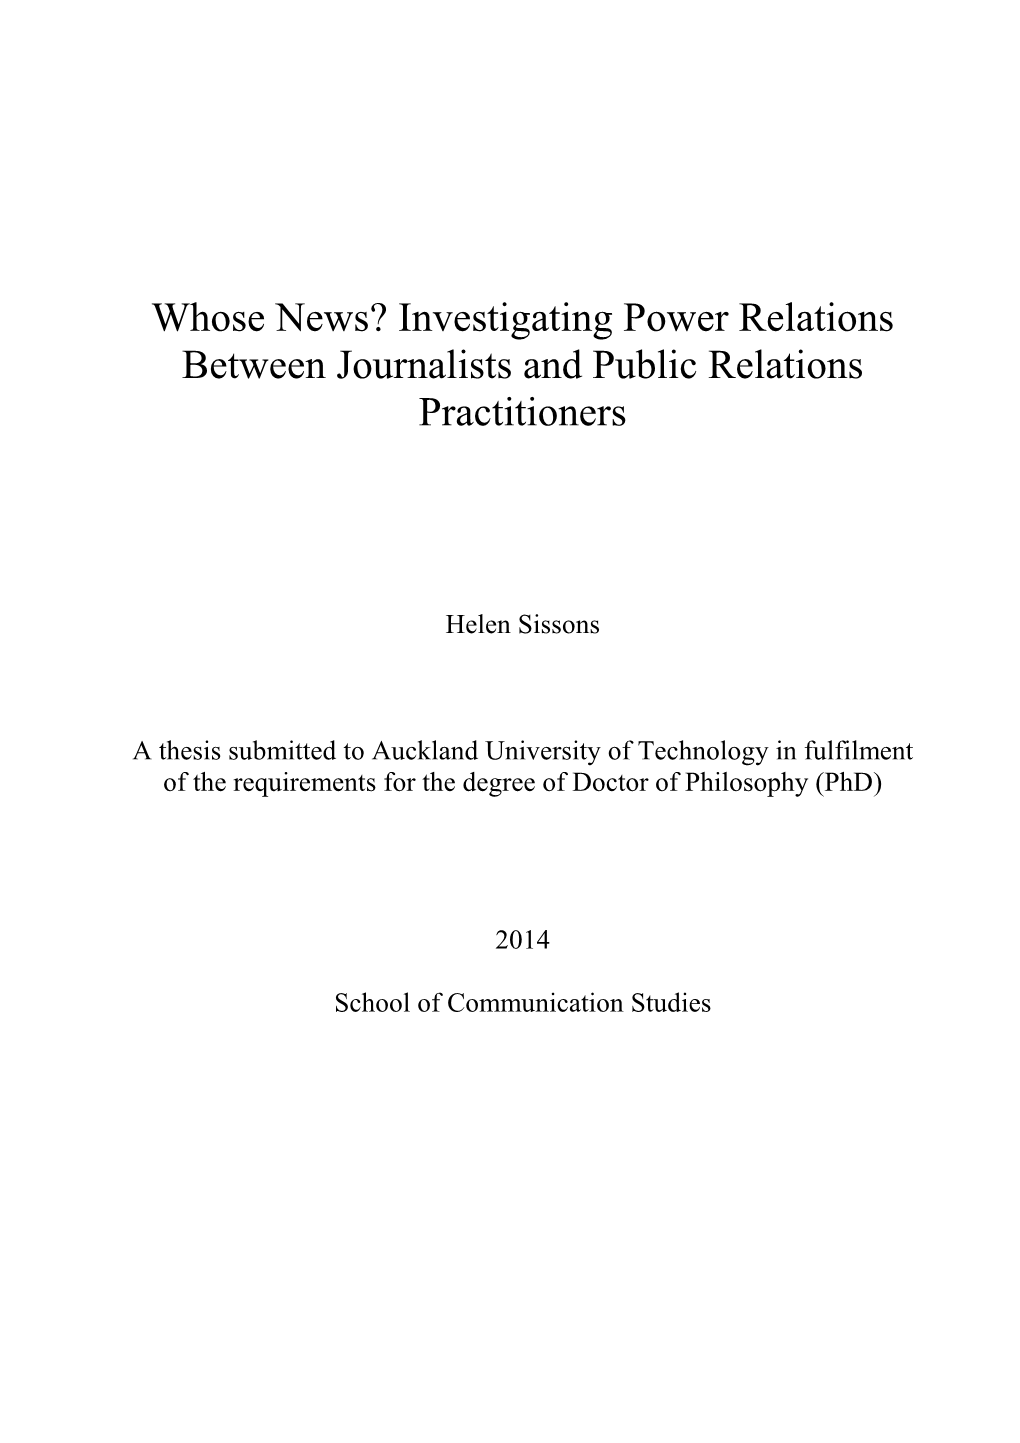 Whose News? Investigating Power Relations Between Journalists and Public Relations Practitioners